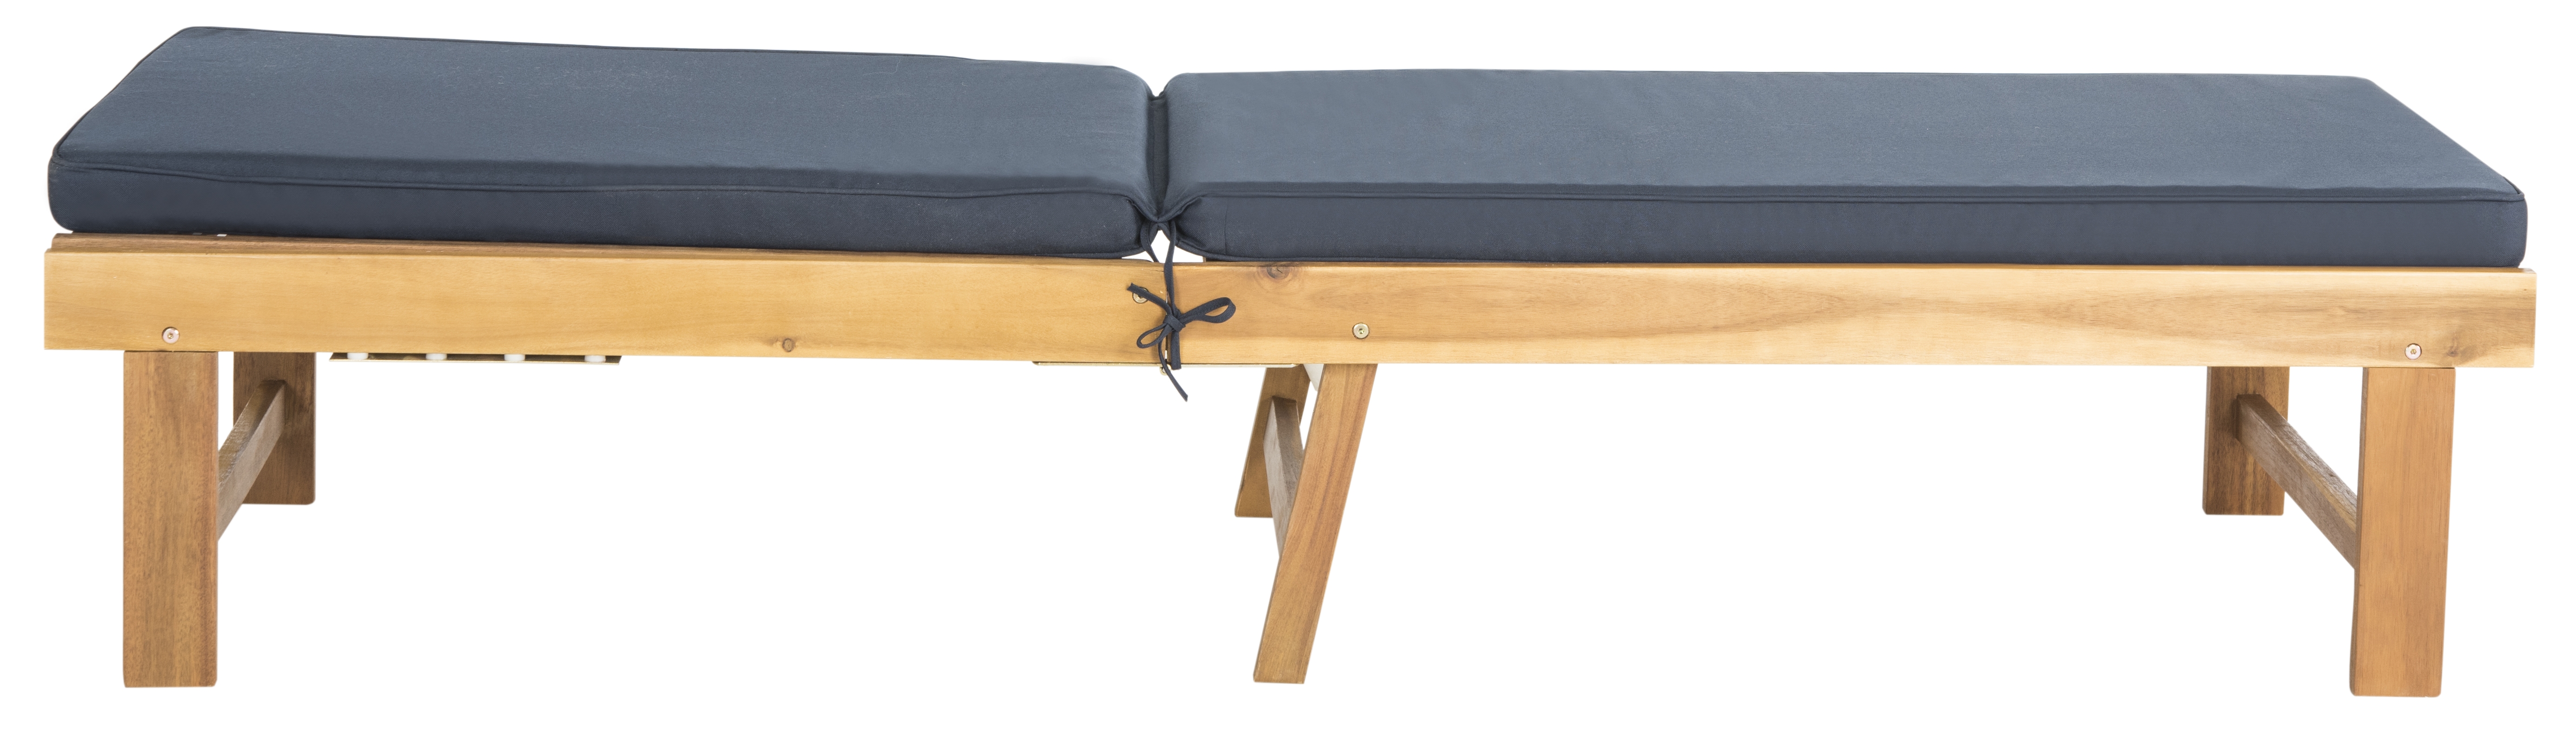 Inglewood Chaise Lounge Chair - Natural/Navy - Arlo Home - Image 3